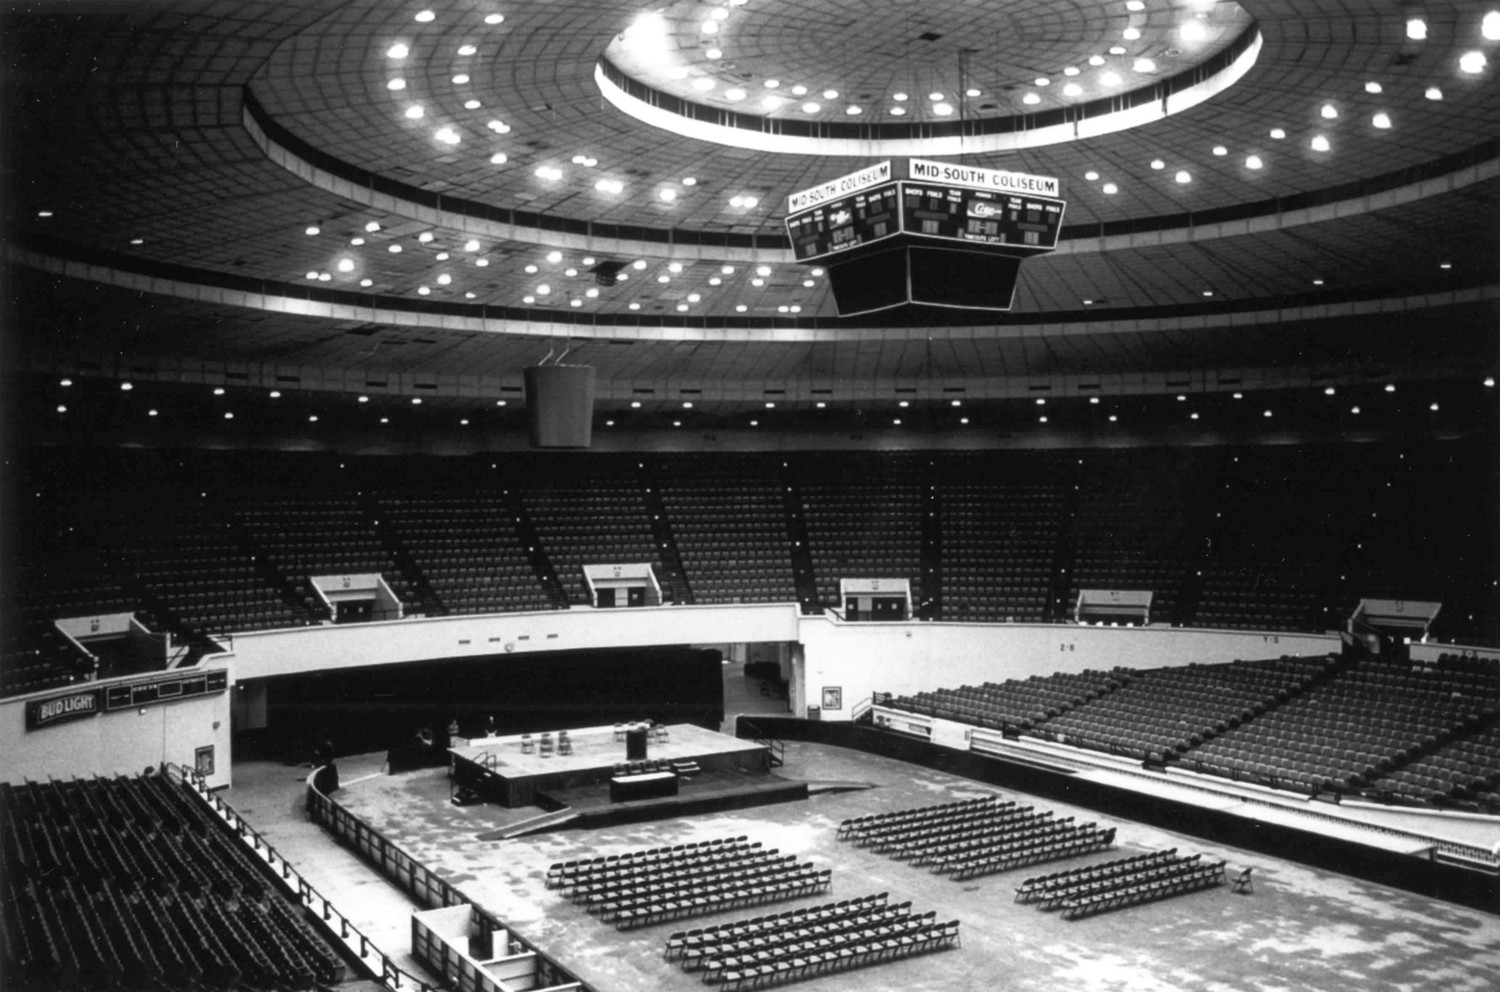 Mid-South Coliseum, Memphis Tennessee Arena, looking northeast (2000)